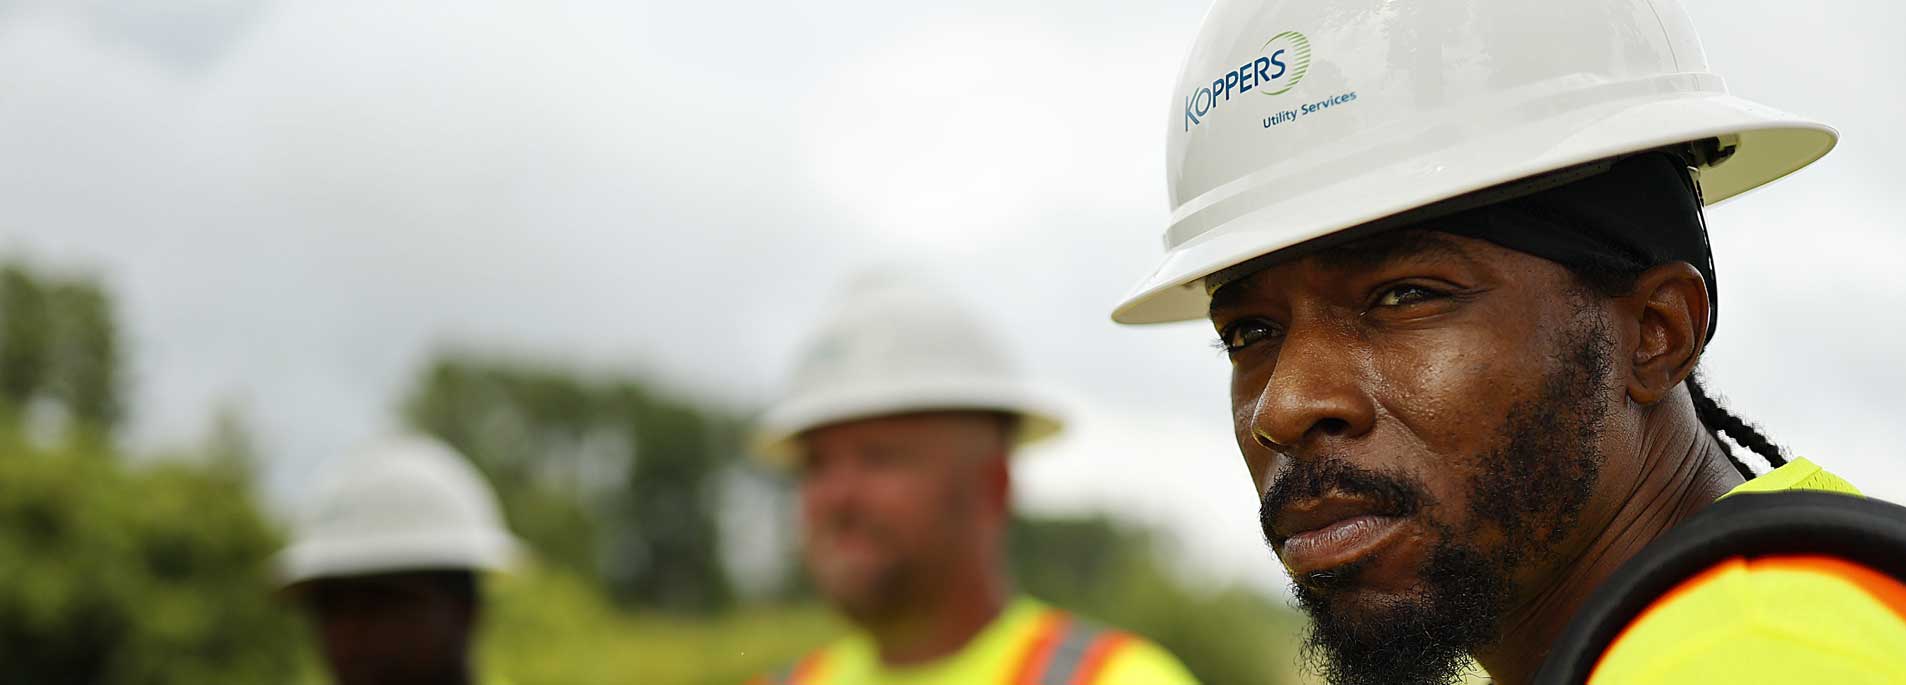 Koppers Utility Services Engineers